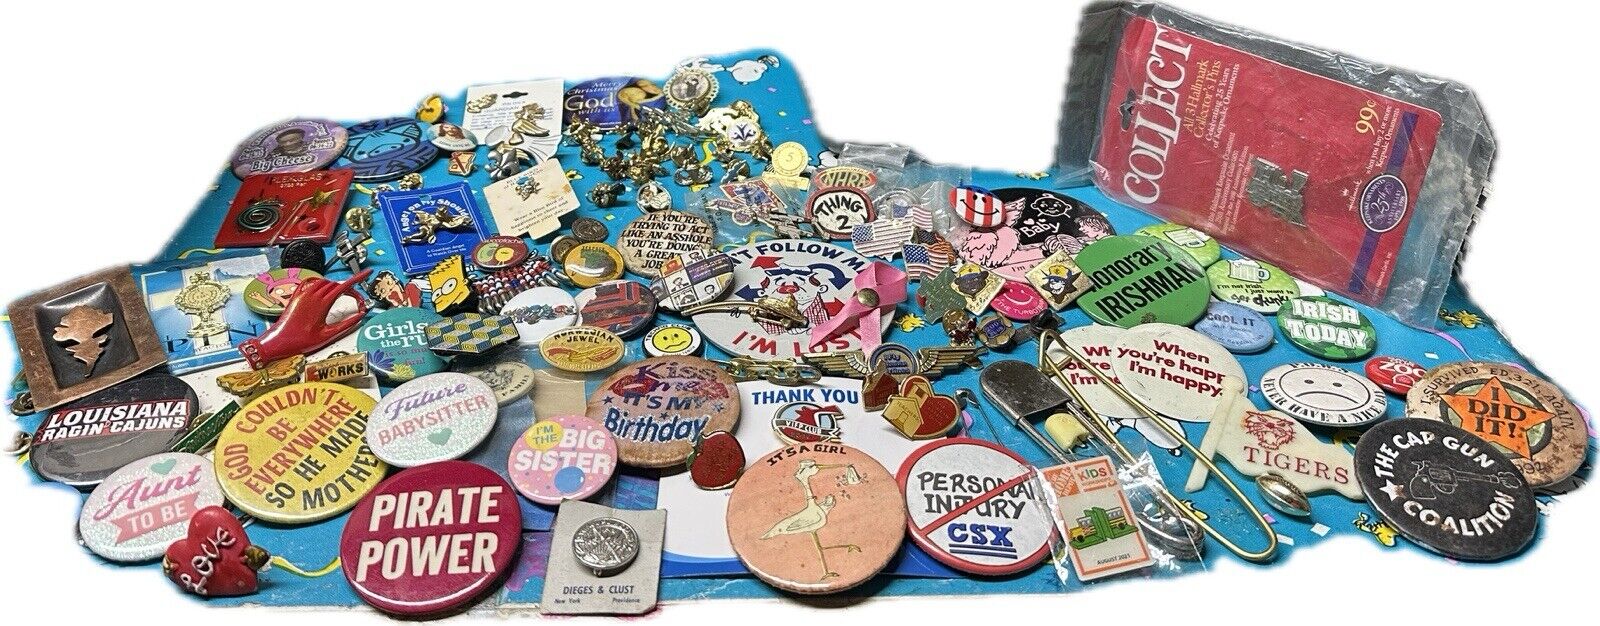 Lot of Vintage Pinbacks Mix Subjects &Dates Cool Finds